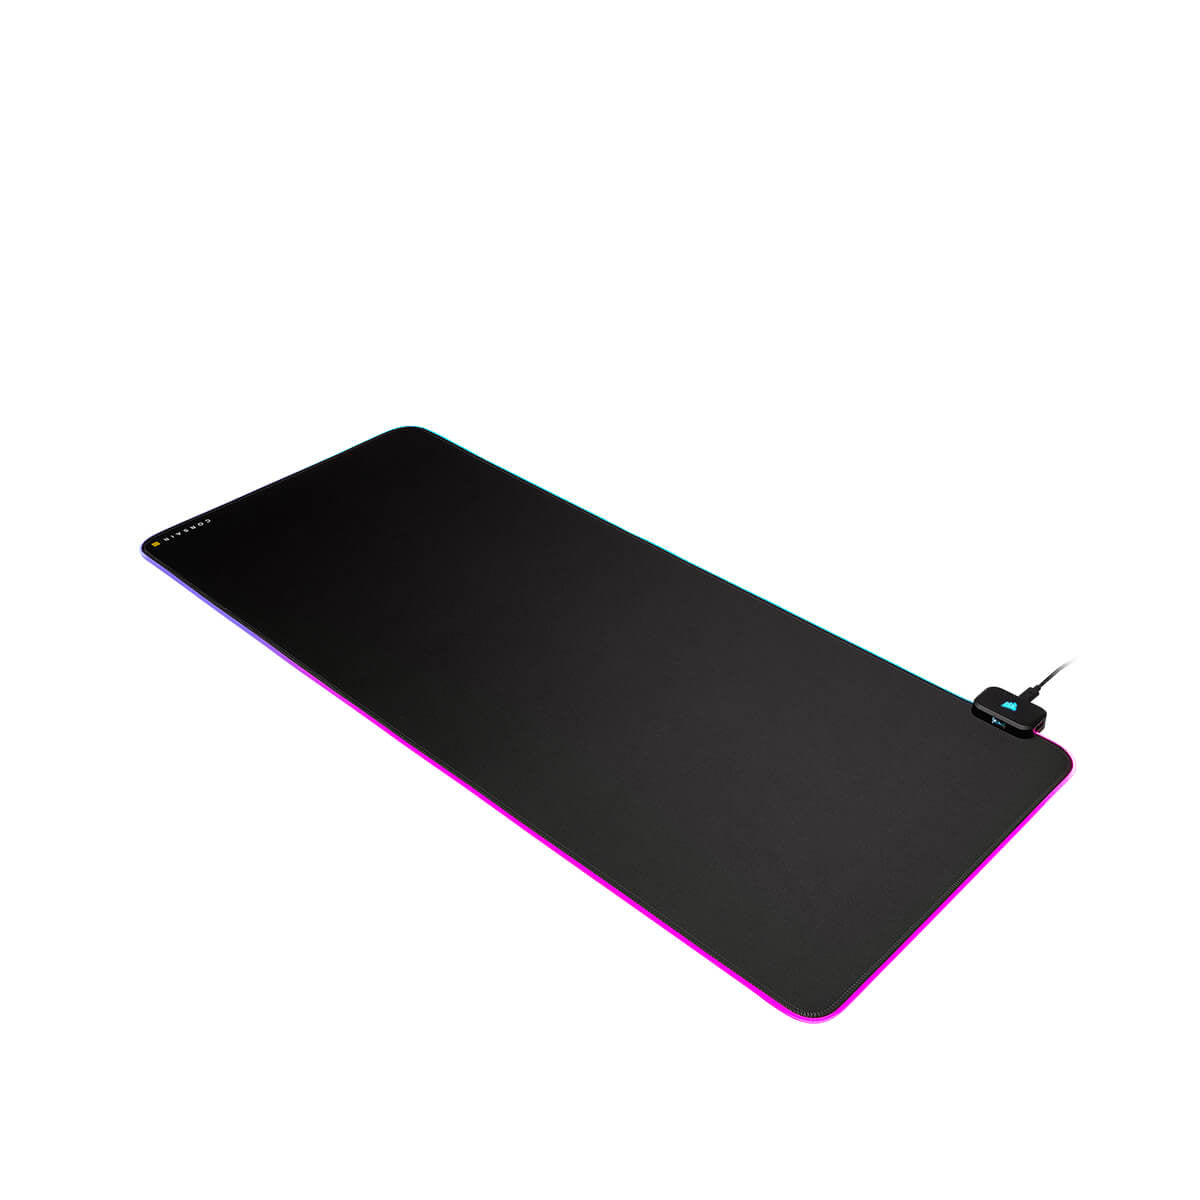 Corsair Mouse pad MM700 RGB extended format